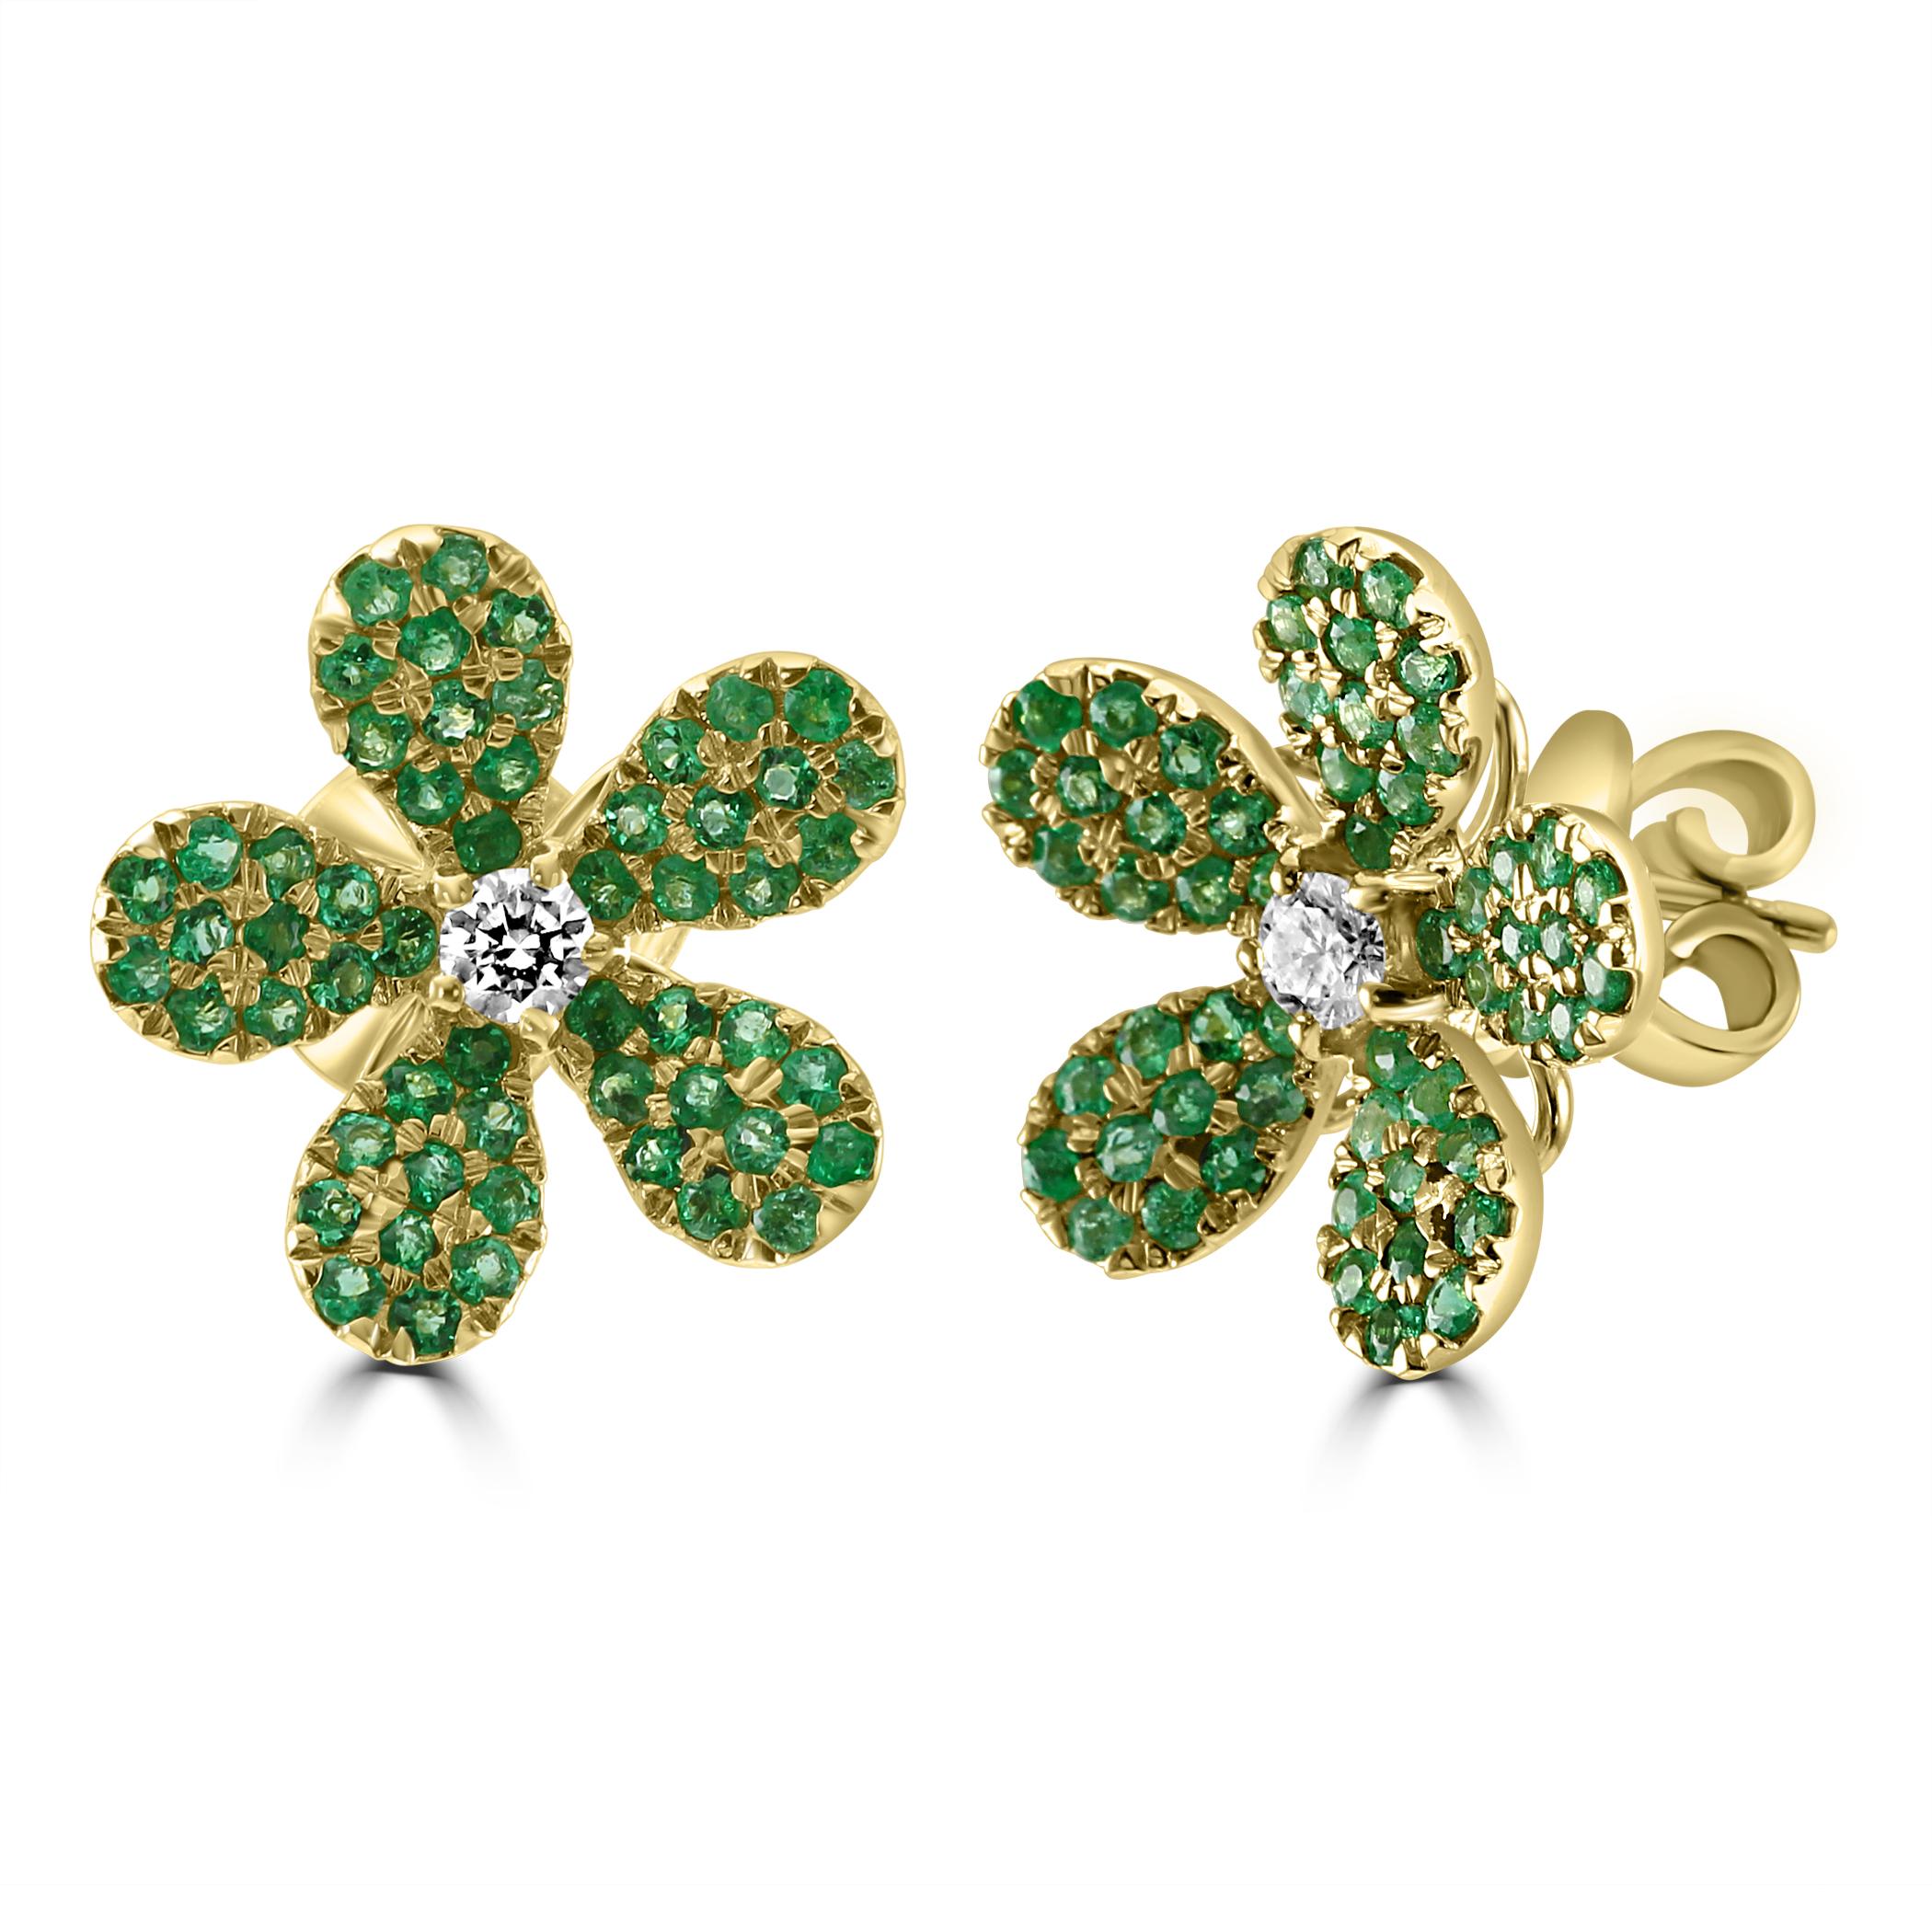 Osiyan is excited to introduce one of our Flower-shaped earrings, a true floral masterpiece that blooms with the vibrancy of 110 captivating Emerald stones totaling to 0.83 carats. Nestled at the heart of this floral arrangement is a single,